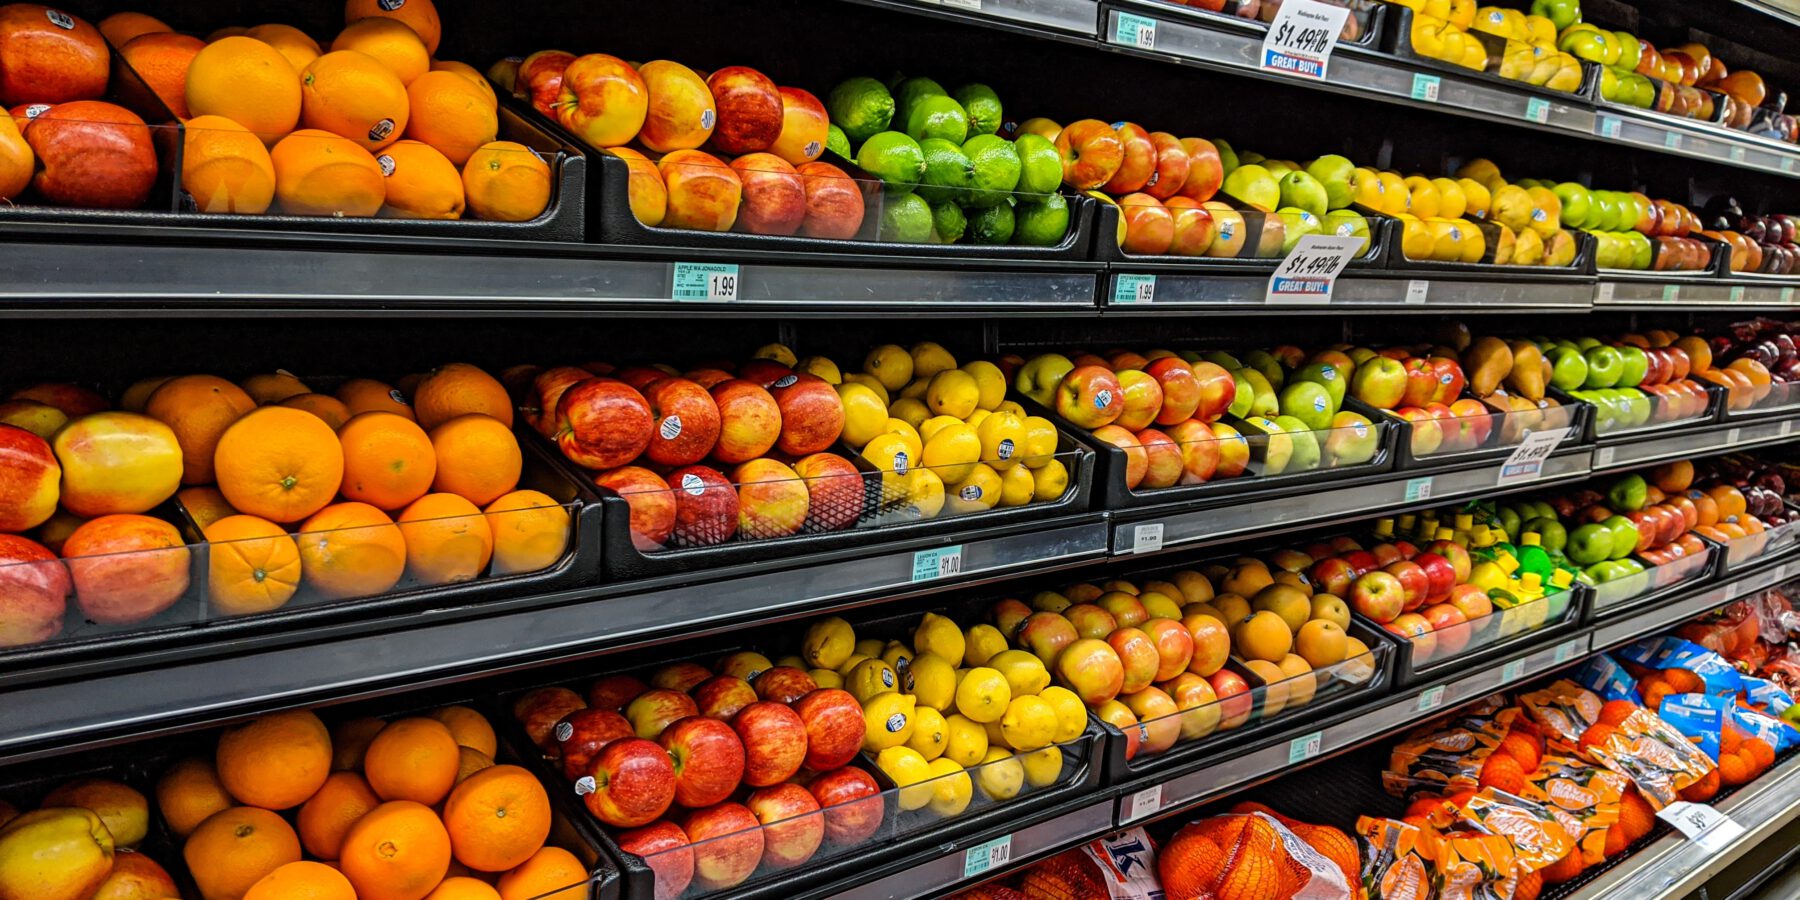 A selection of fruit in a commercial refrigerated produce case